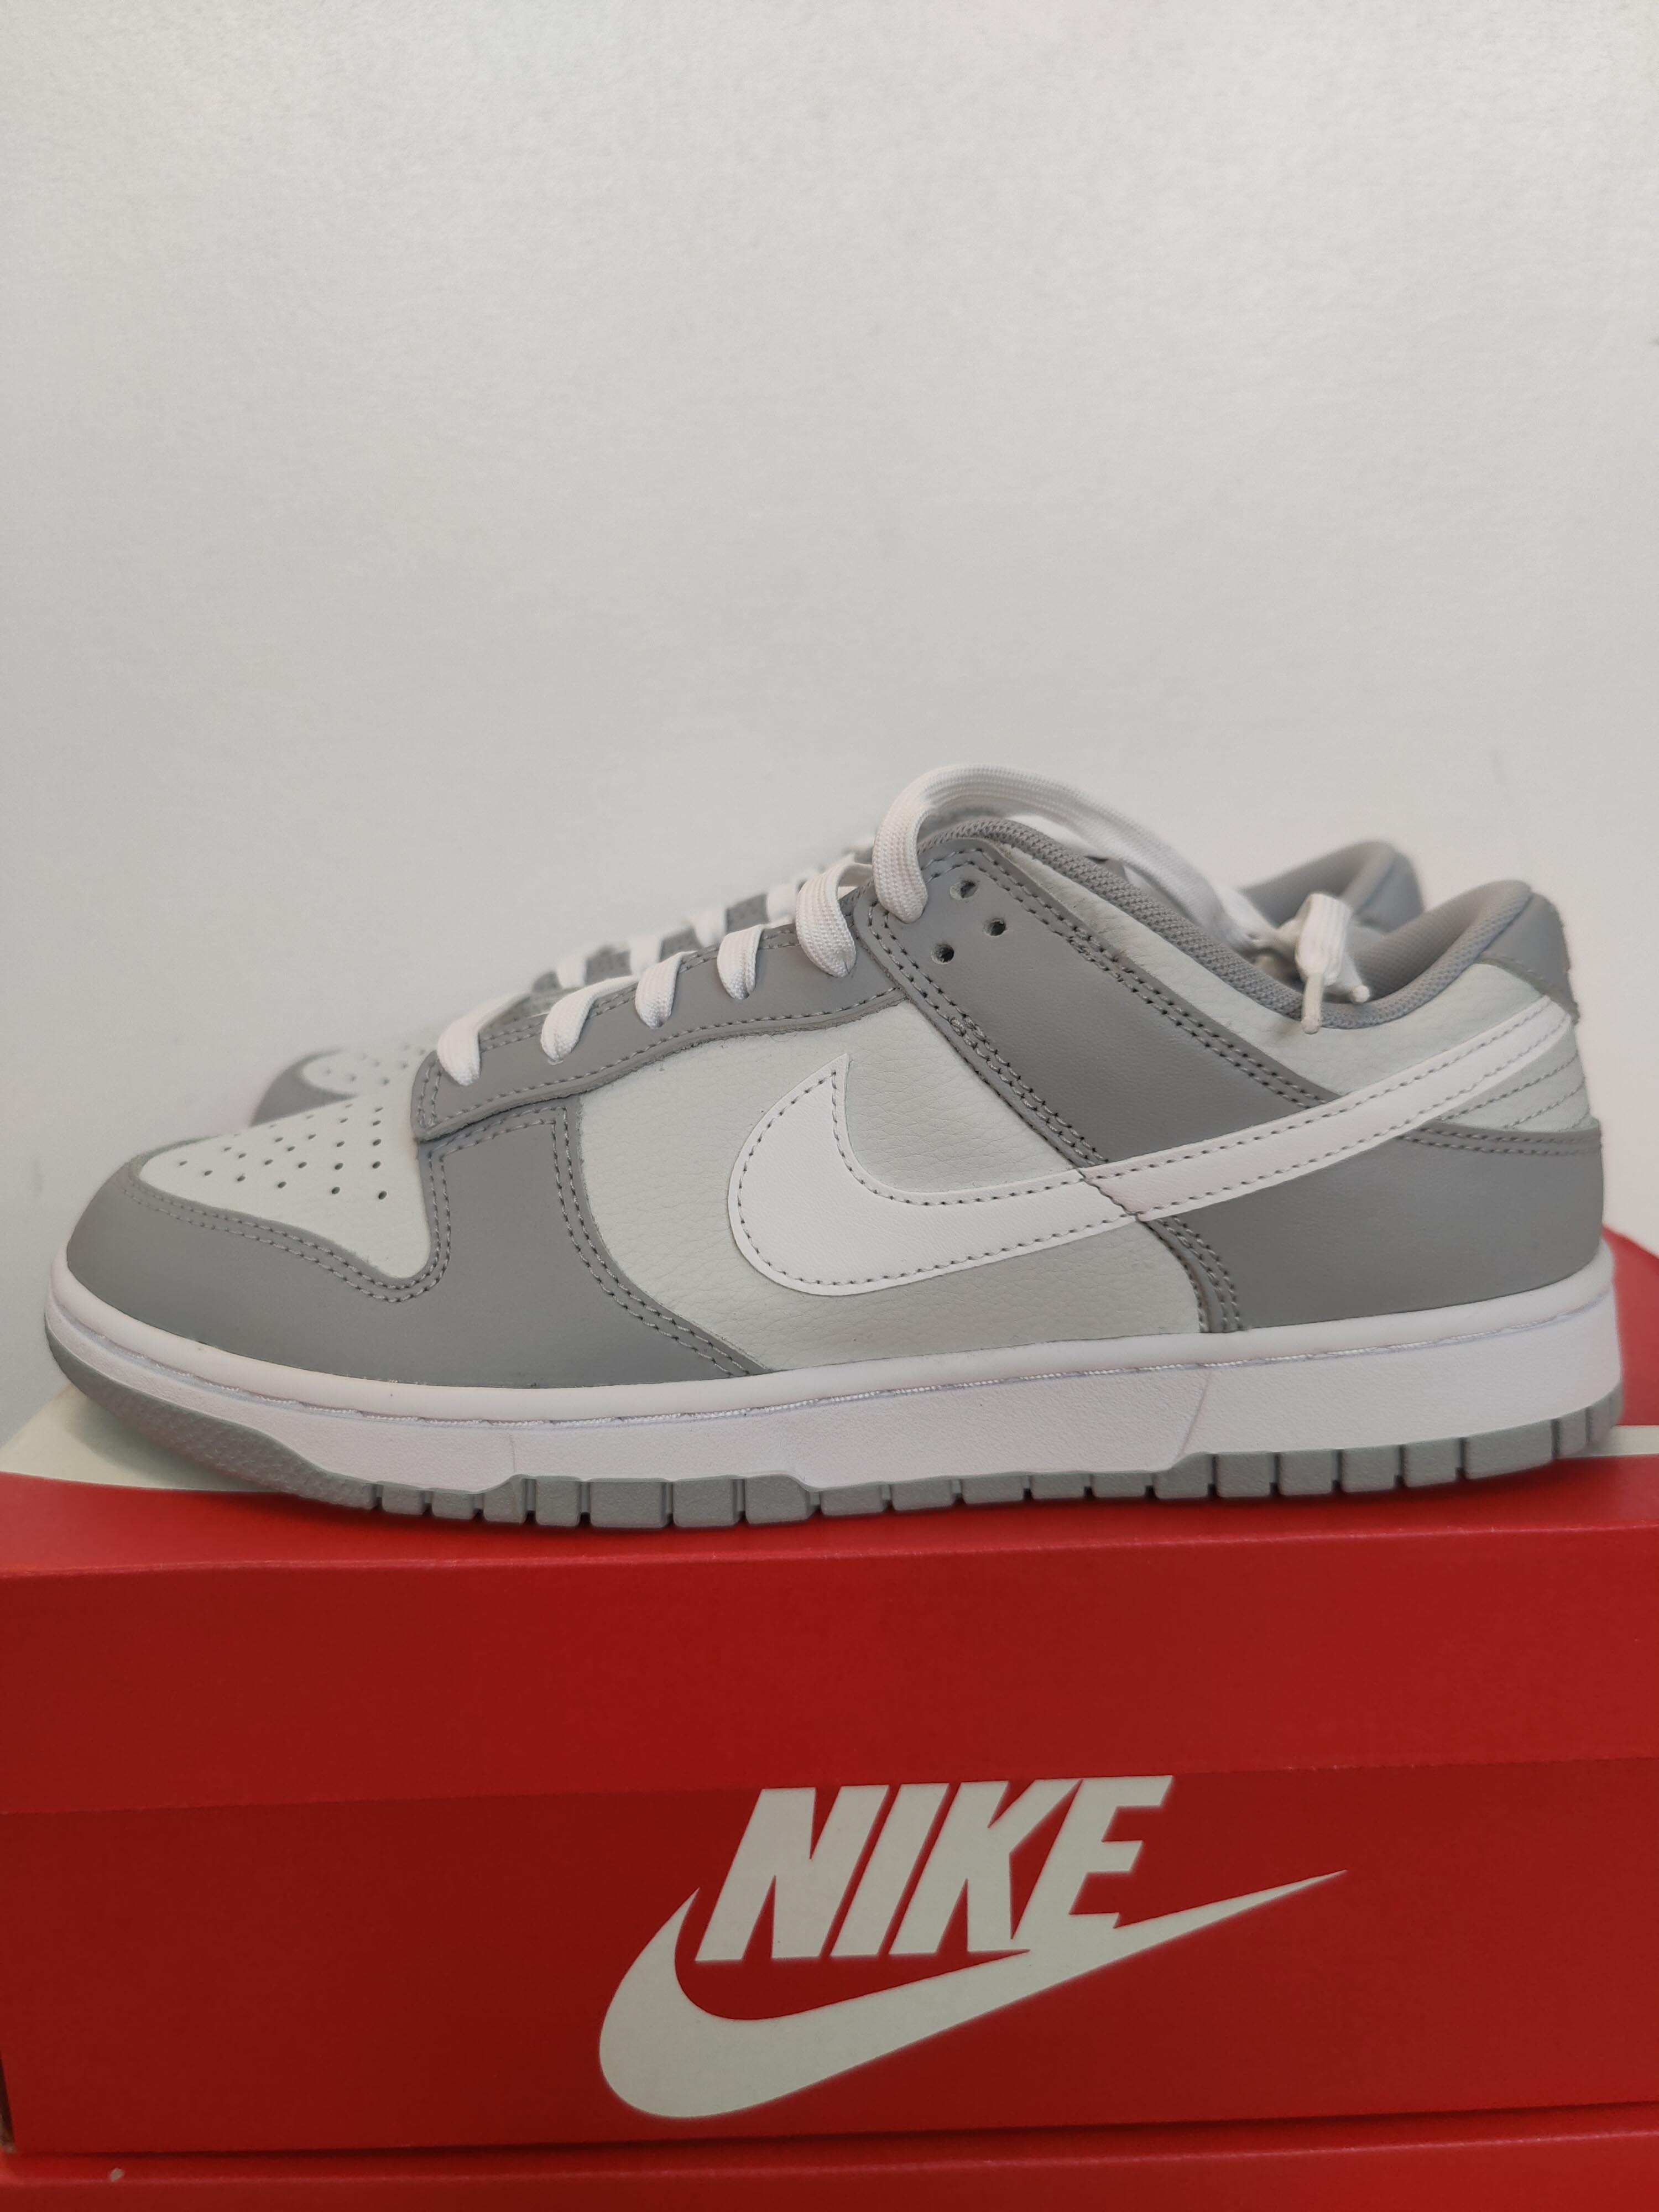 826 - Nike dunk low Two tone grey | Item Details - Phenomenalsole